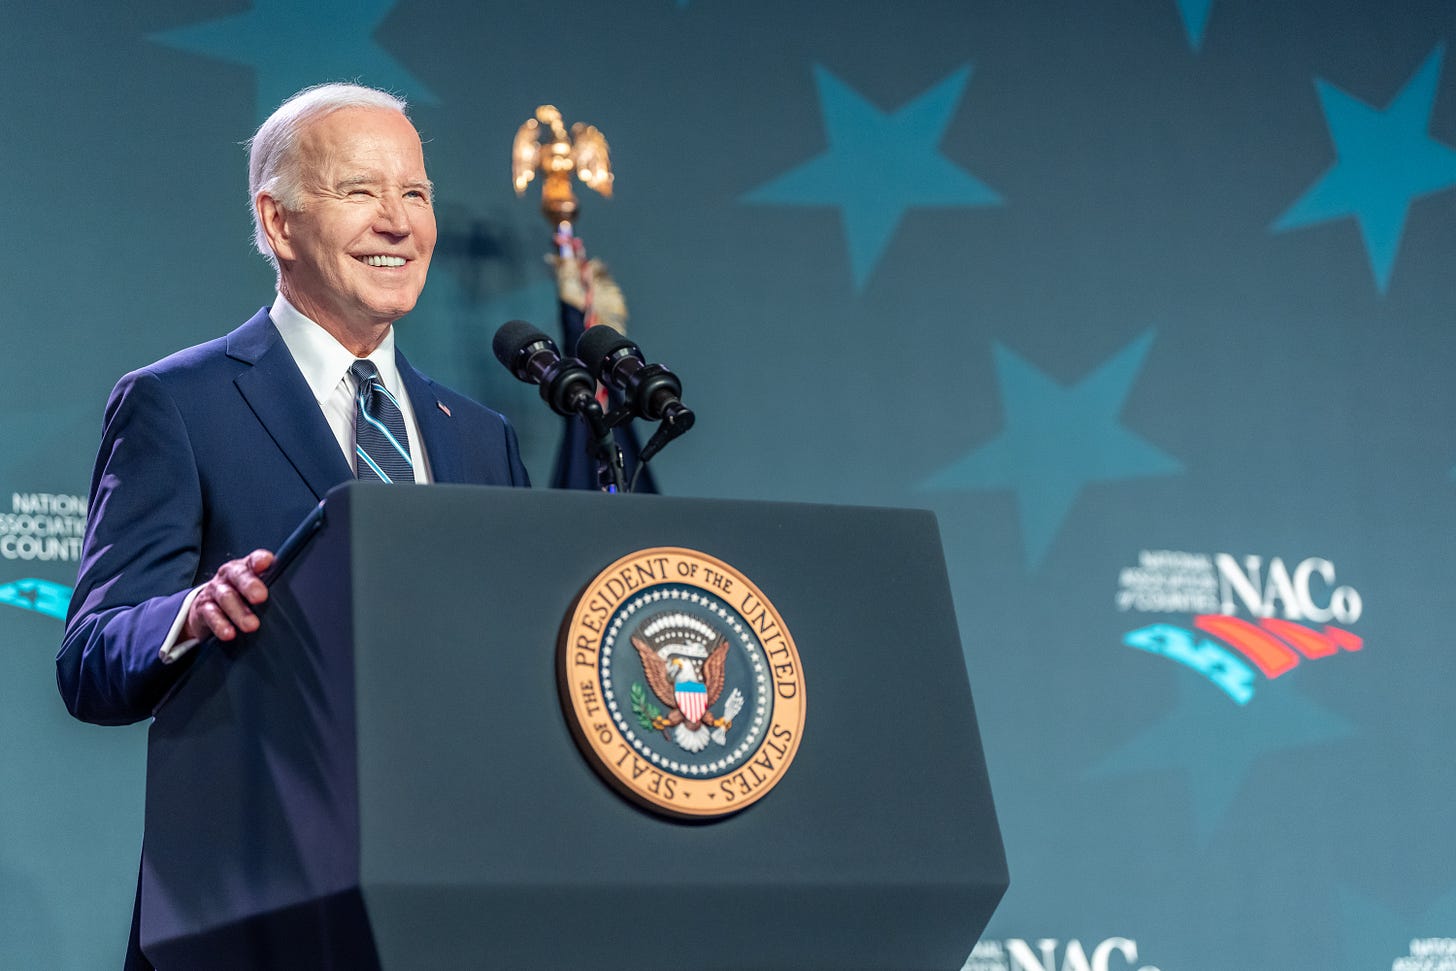 President Biden delivers remarks at the National Association of Counties Legislative Conference.